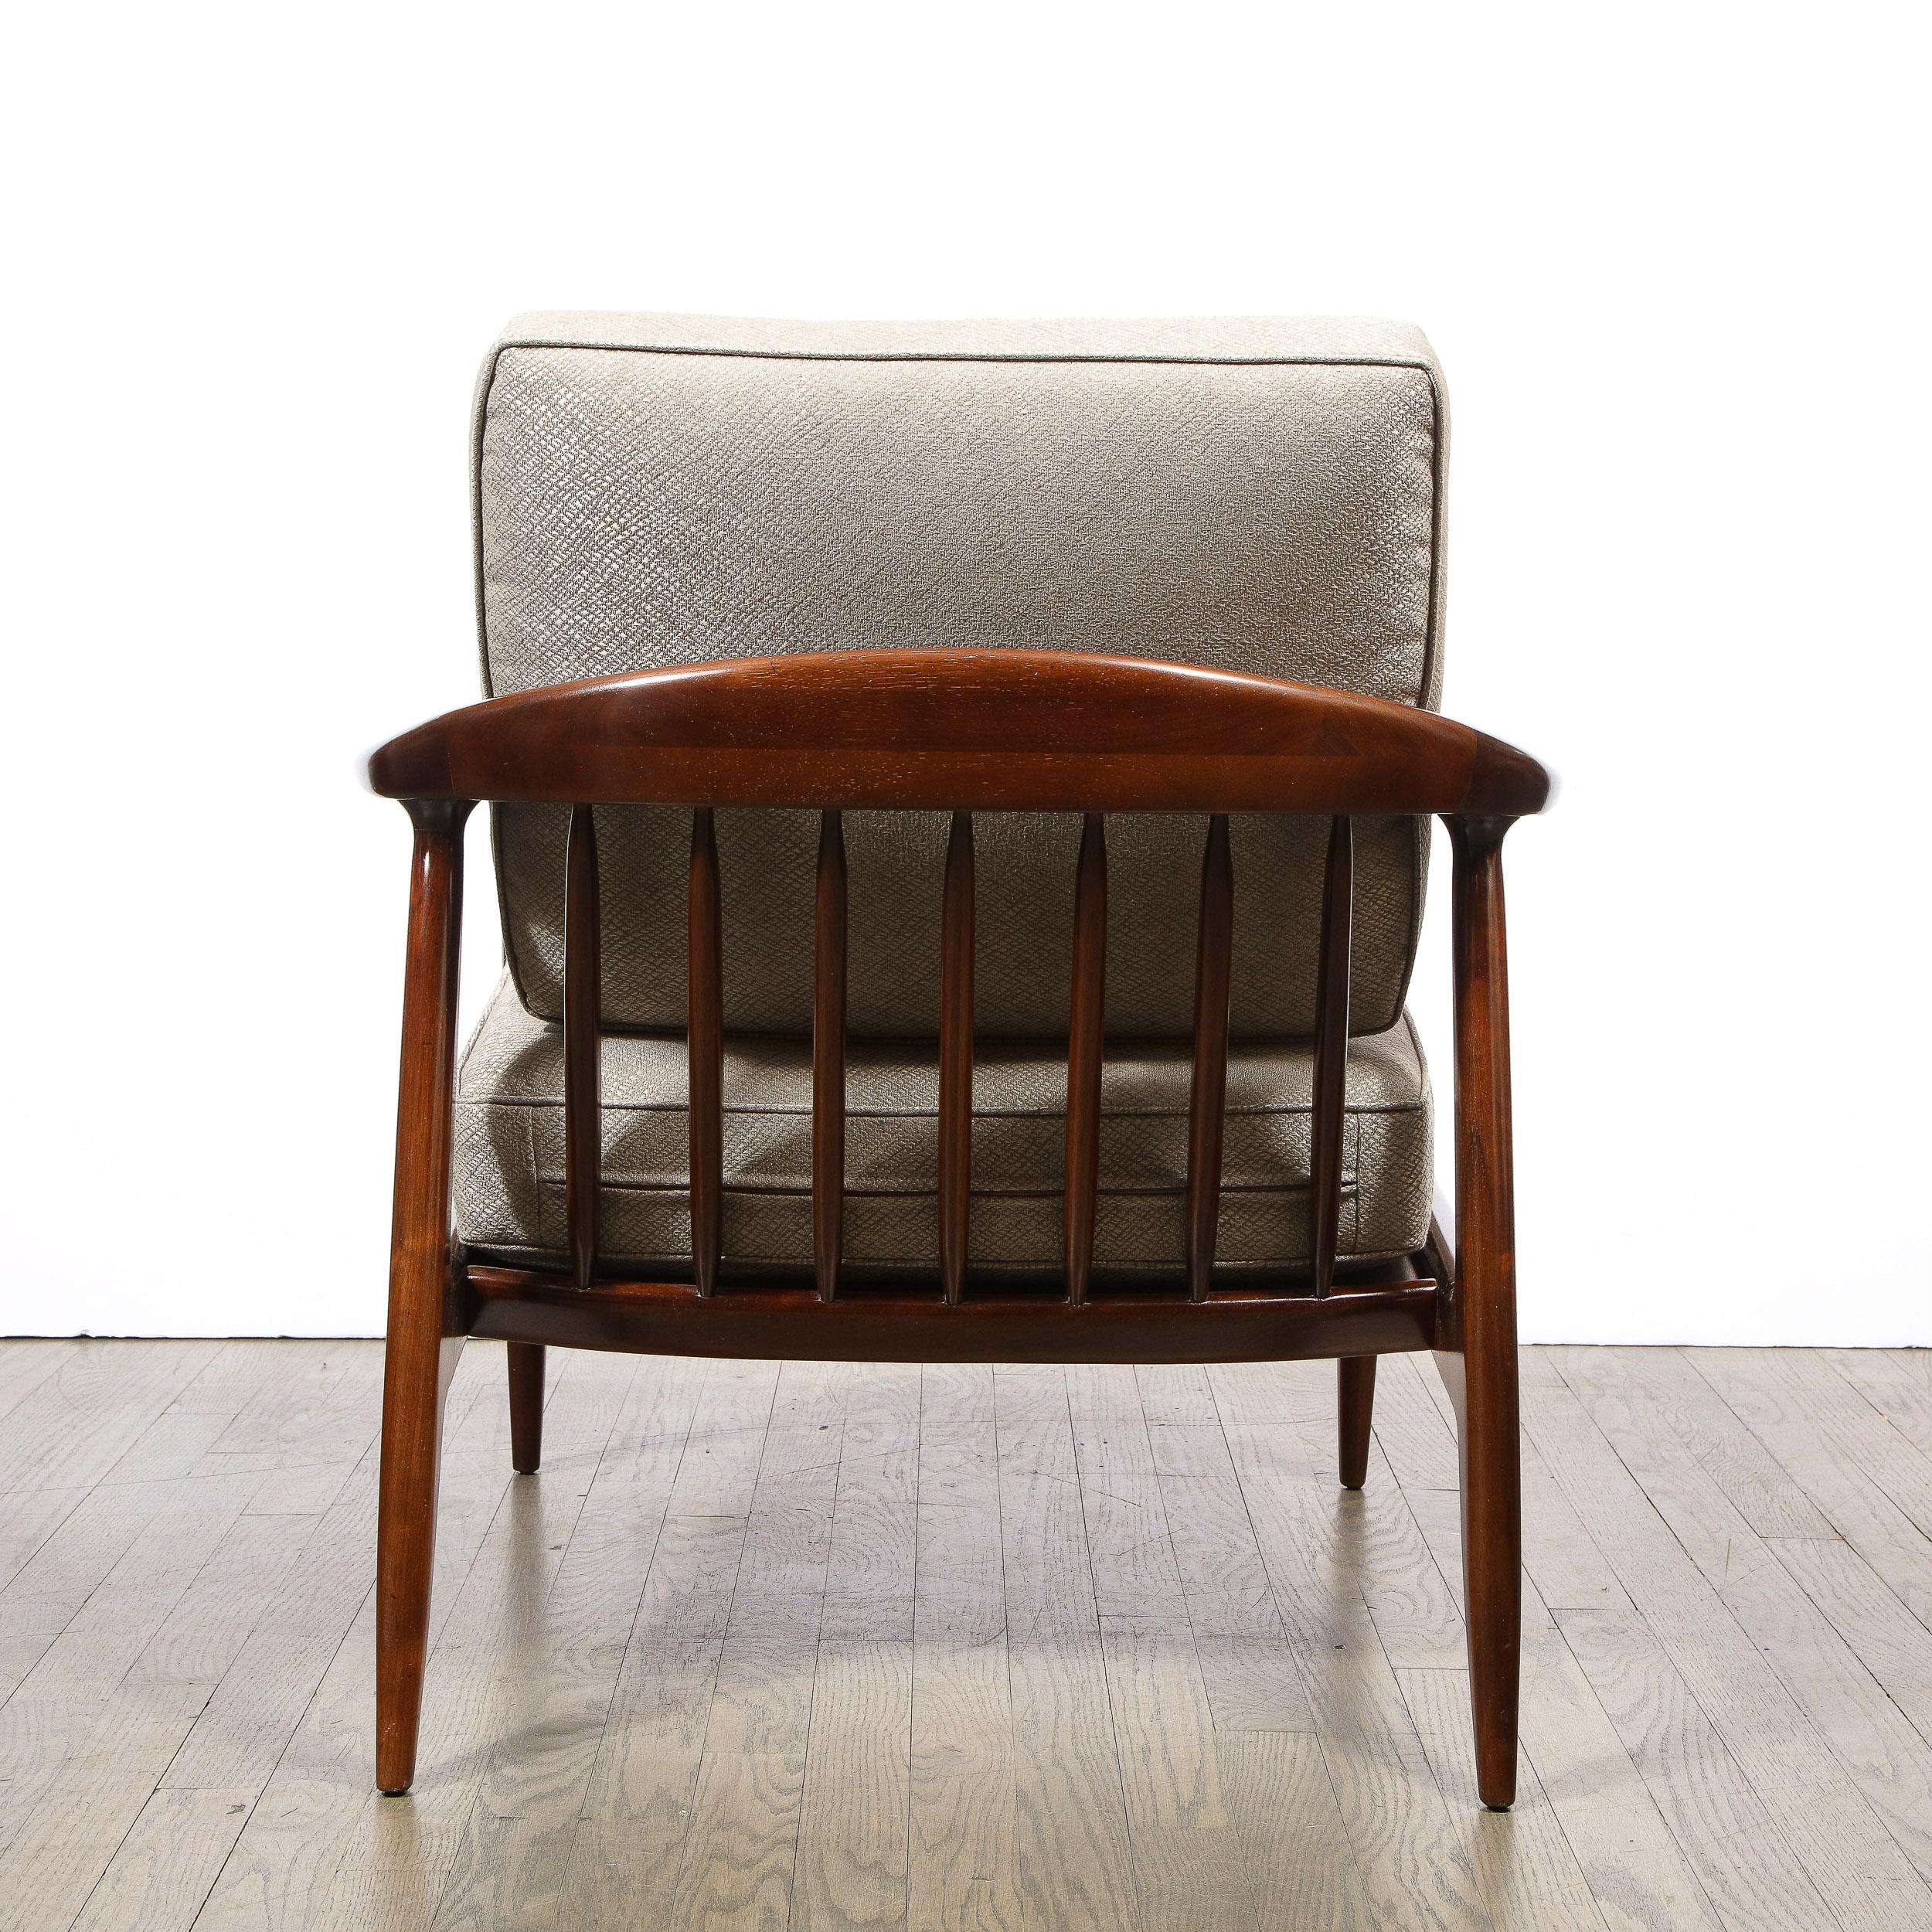 This sculptural and elegant pair of Mid Century Modern arm chairs were realized in the United States circa 1950. They feature elegantly contoured walnut arms and feet full of oblique angles and idiosyncratic symmetries. Additionally, the back offers